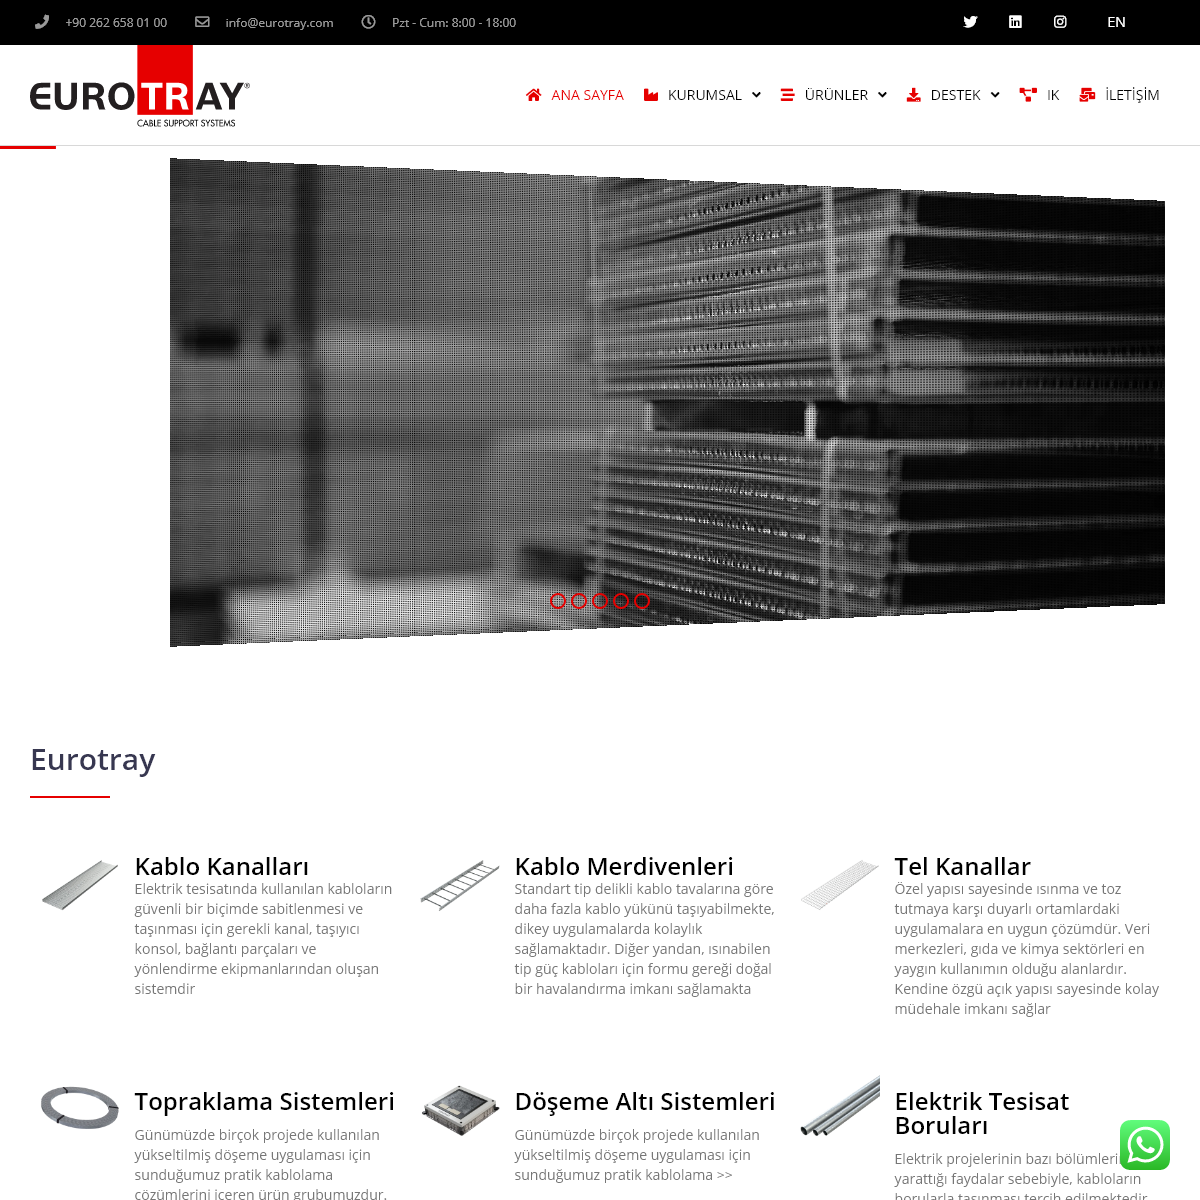 A complete backup of eurotray.com